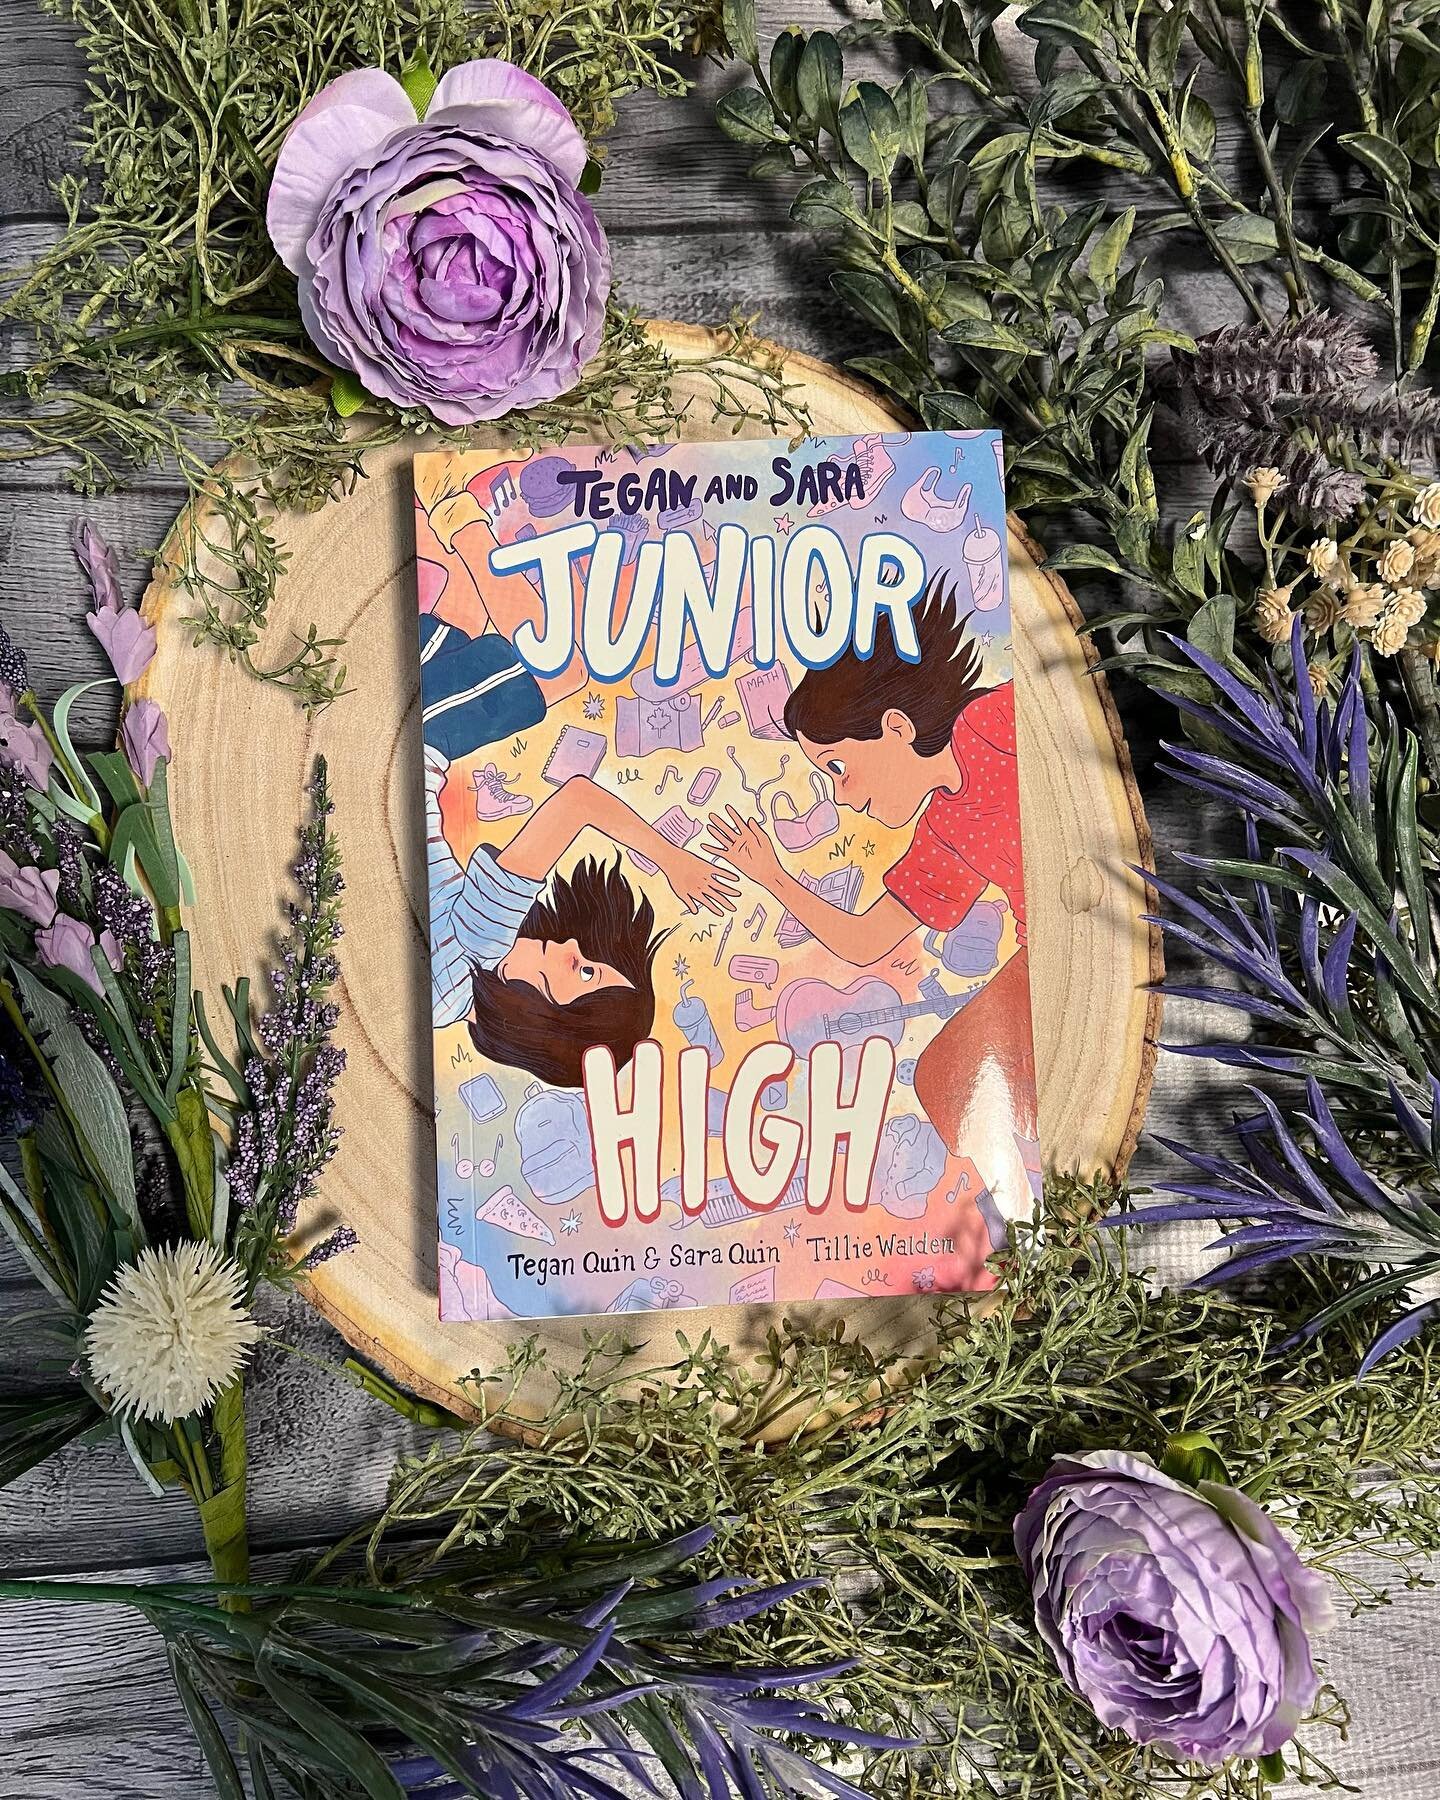 If you didn&rsquo;t know, I&rsquo;m a HUGE @teganandsara fan! So as soon as I heard they were working on a #mg #graphicnovel I knew I needed it!!

#middlegradebooks #mgreads